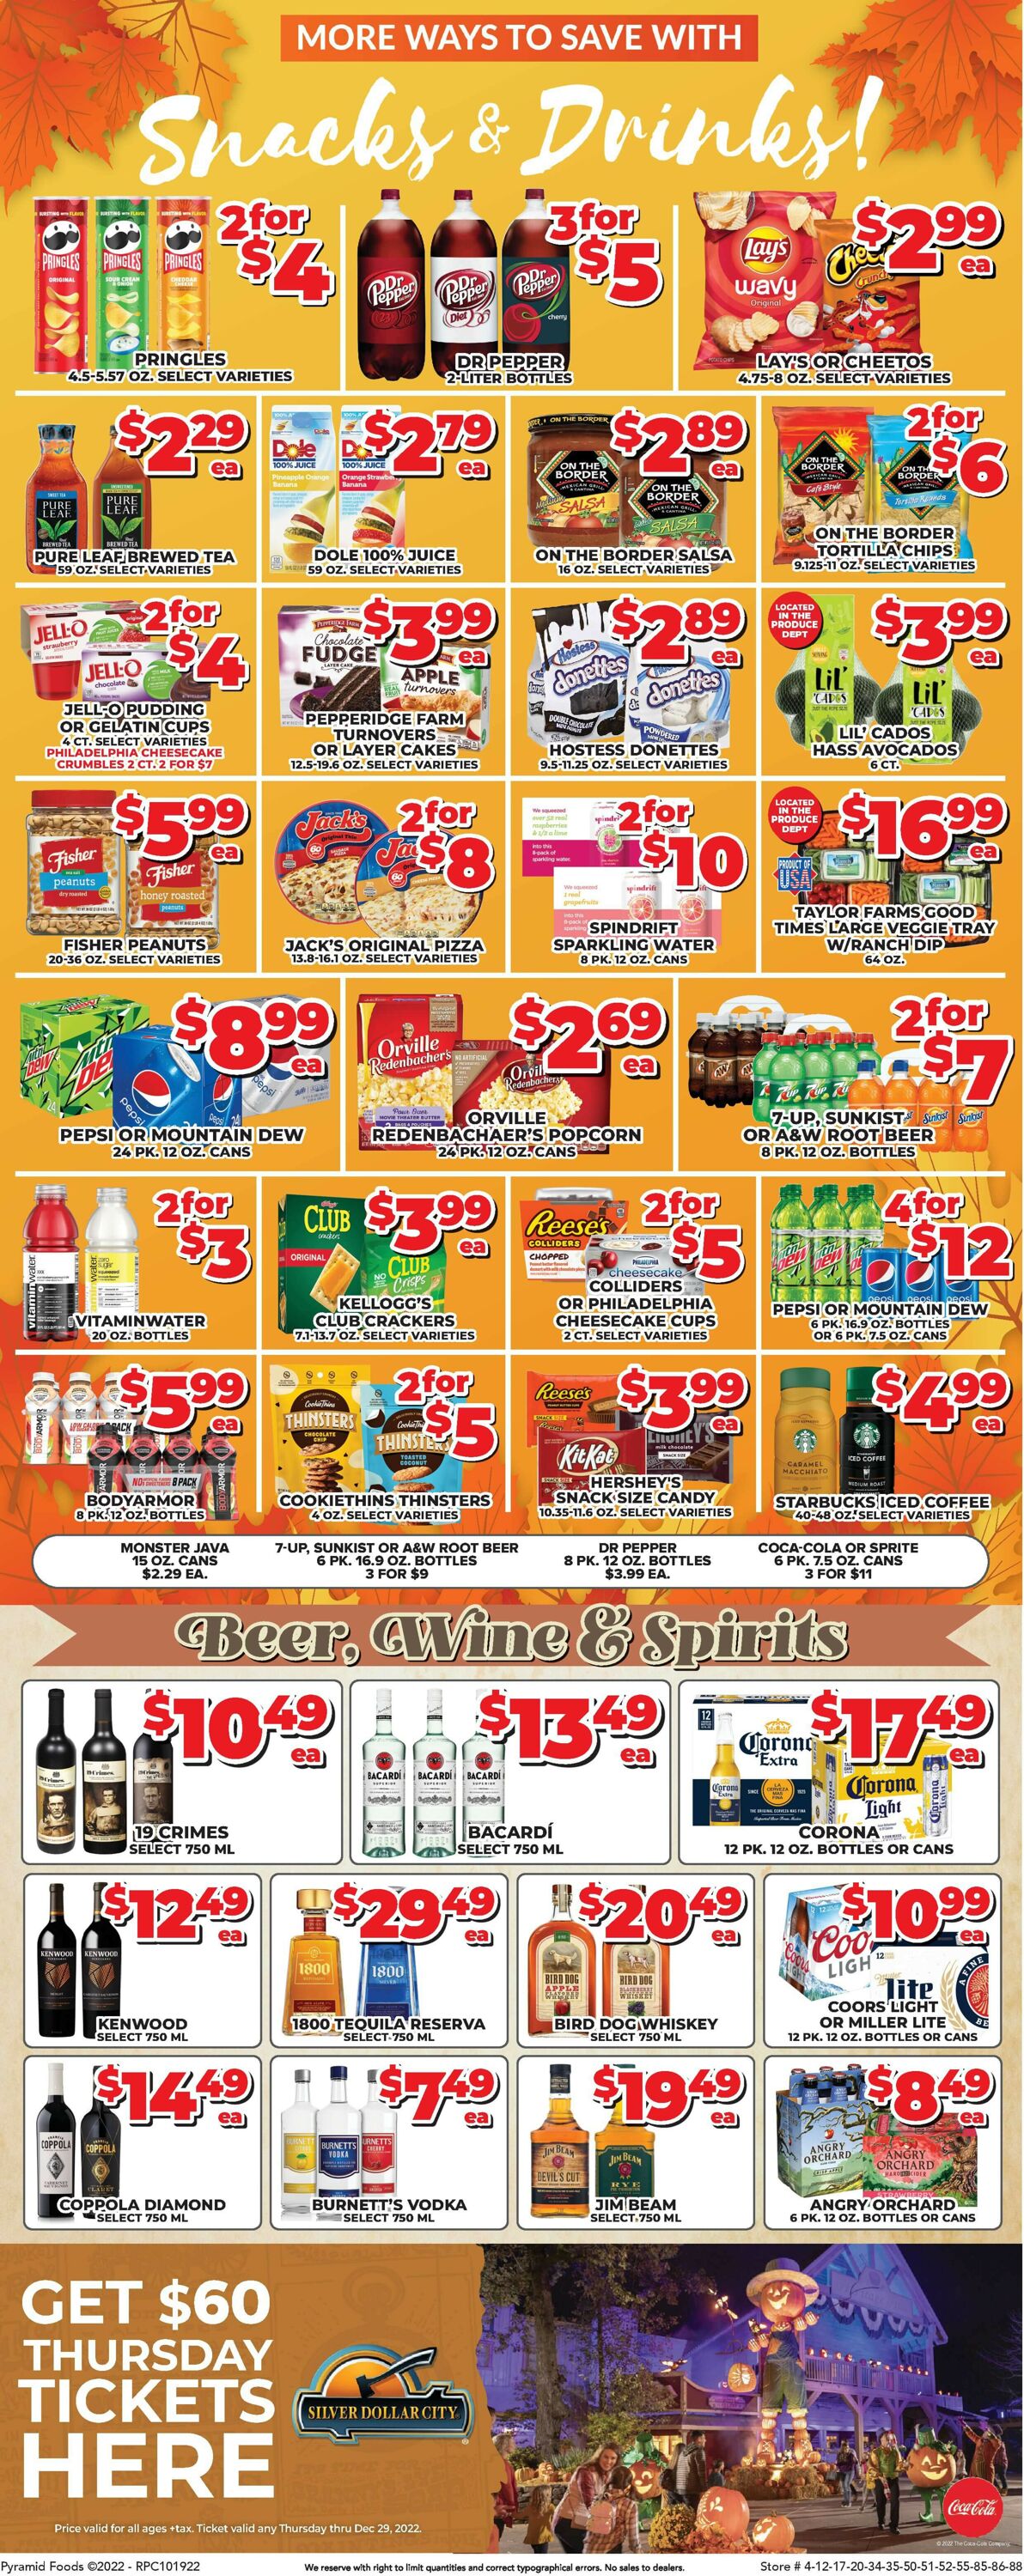 Price Cutter Weekly Ad Circular - valid 10/19-10/25/2022 (Page 4)